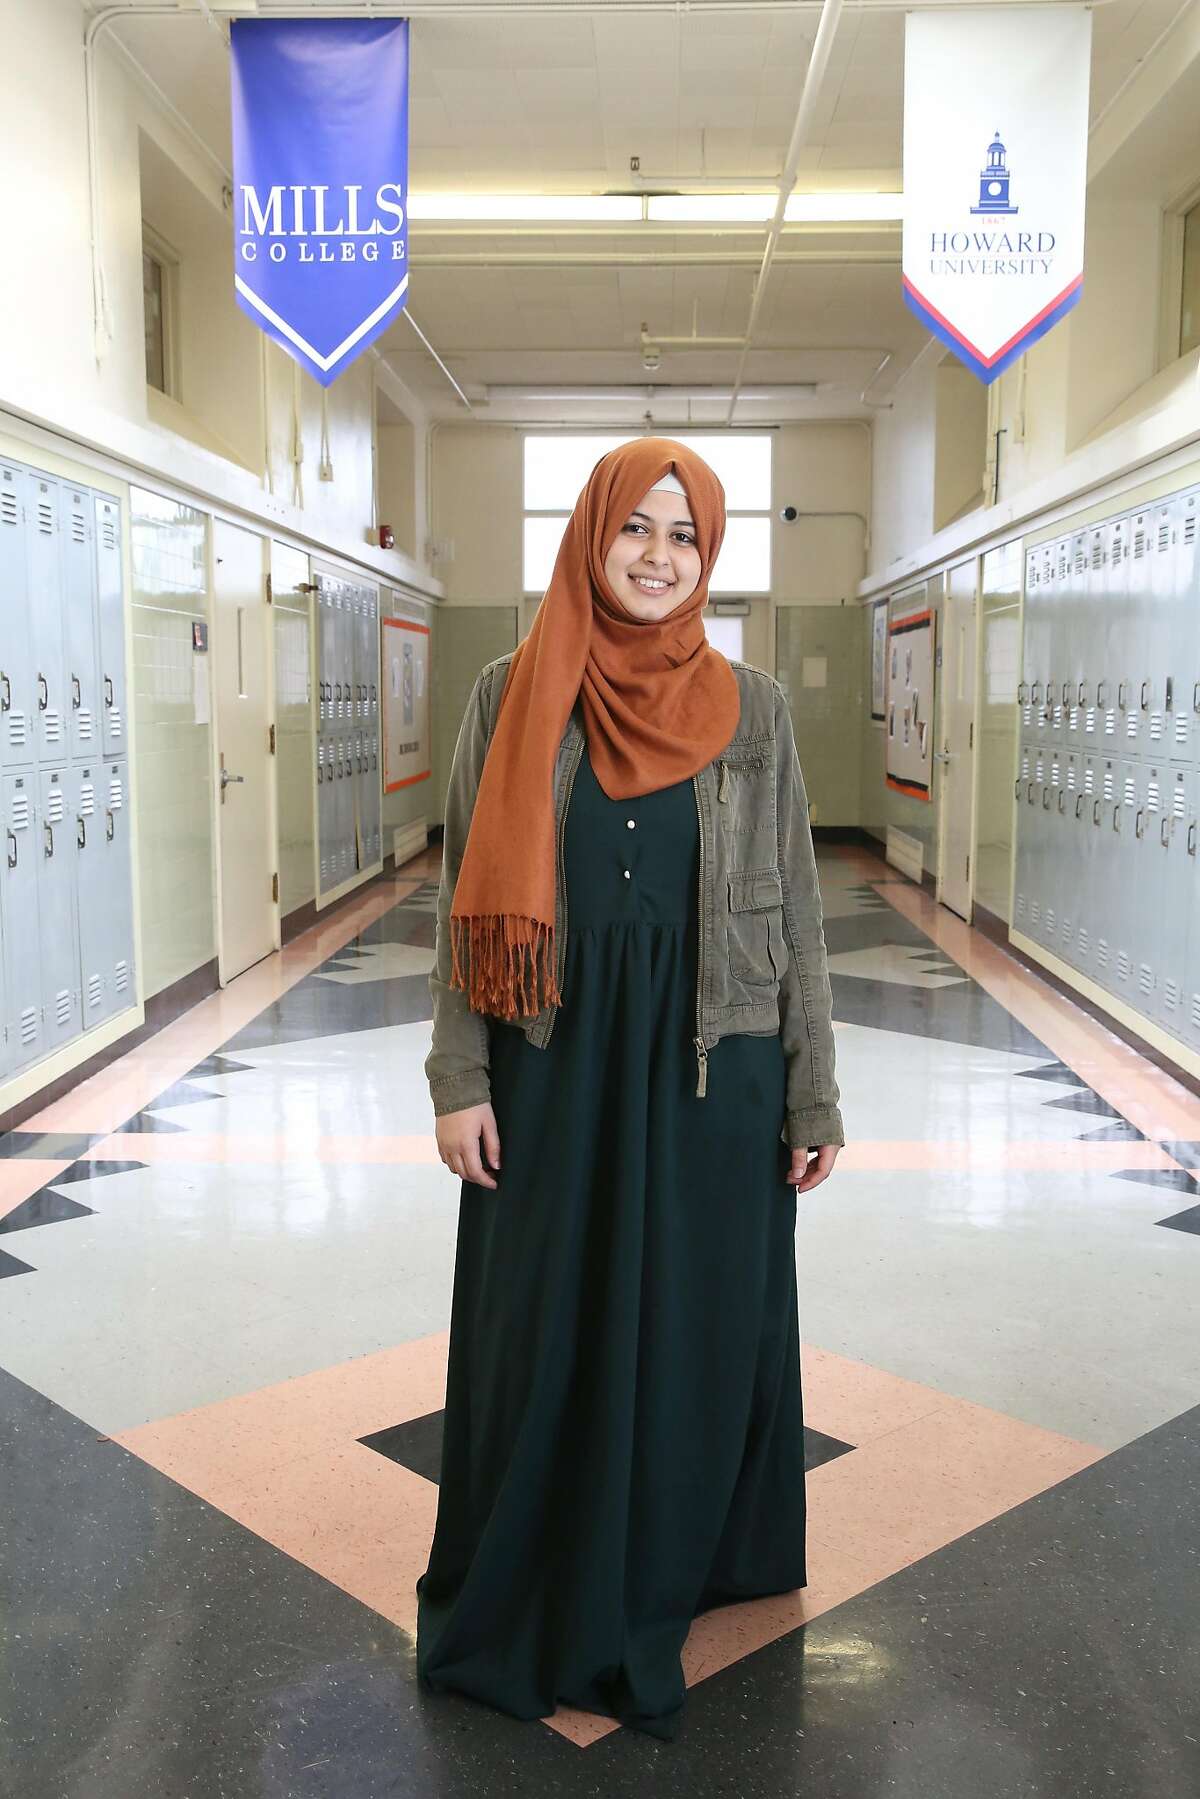 Senior student Haifa Algabri, 17 years old, at McClymonds High School as she talks about attending Mills College after graduating on Friday, May 18, 2018 in Oakland, Calif.